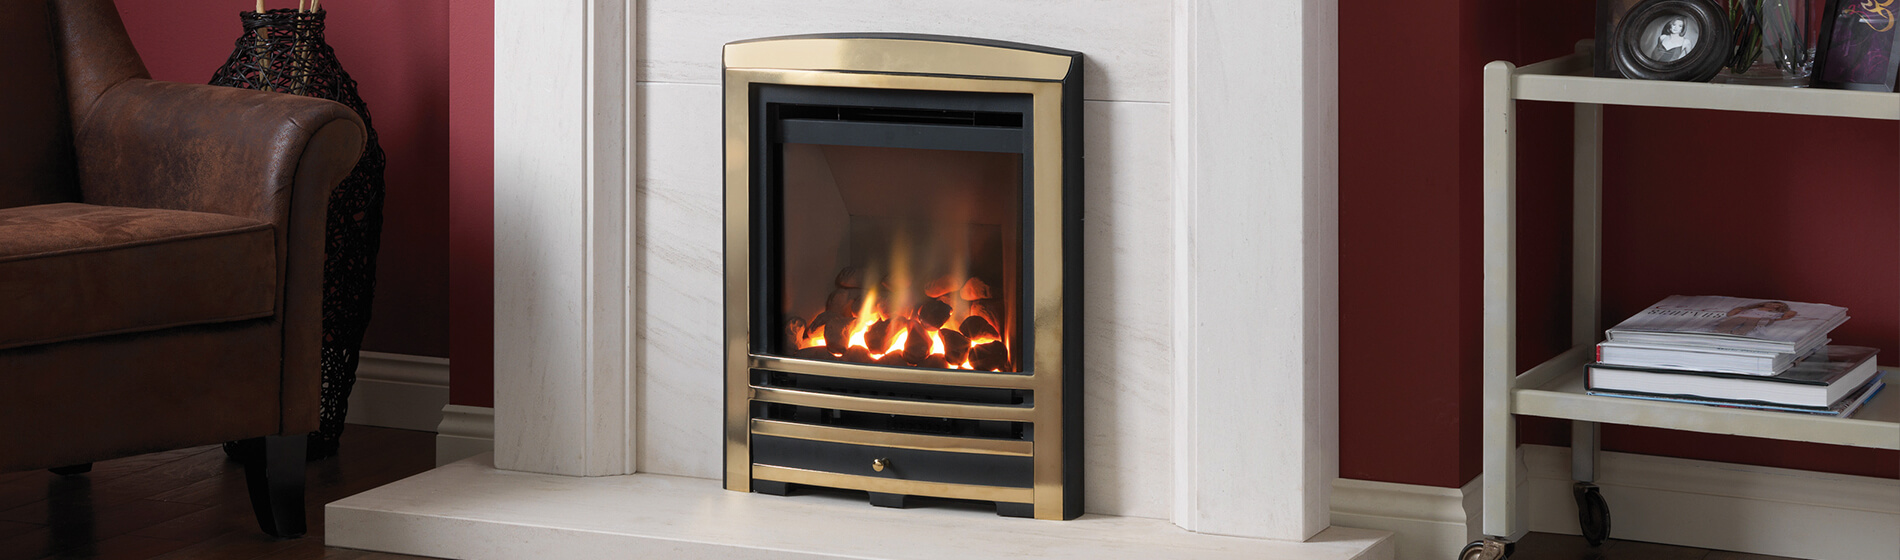 Wood Burning Stove | Solid Fuel Inset Stove | York, Scarborough